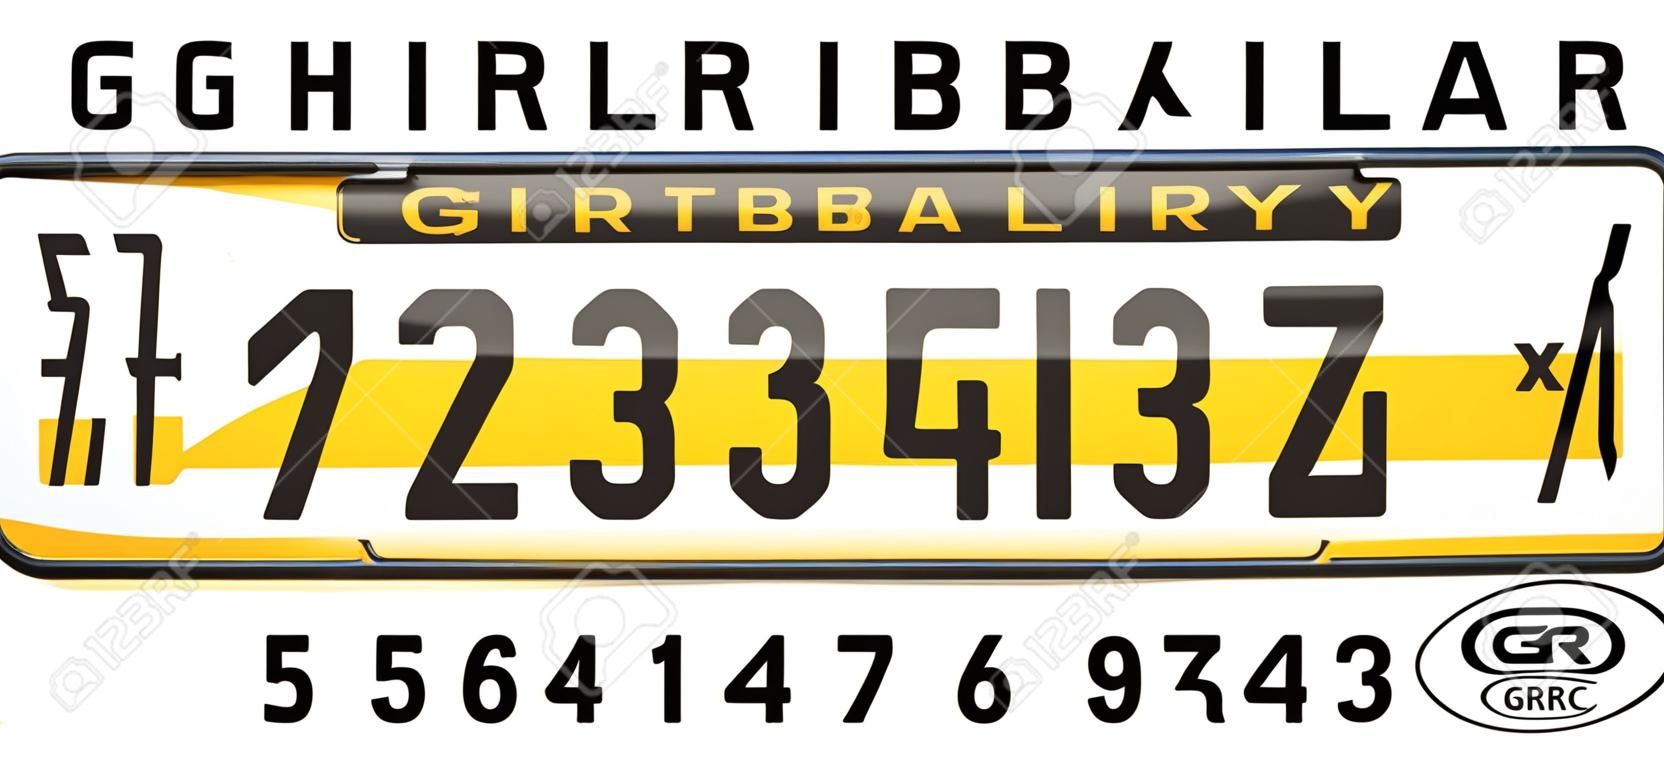 Gibraltar car license plate, letters, numbers and symbols, Europe